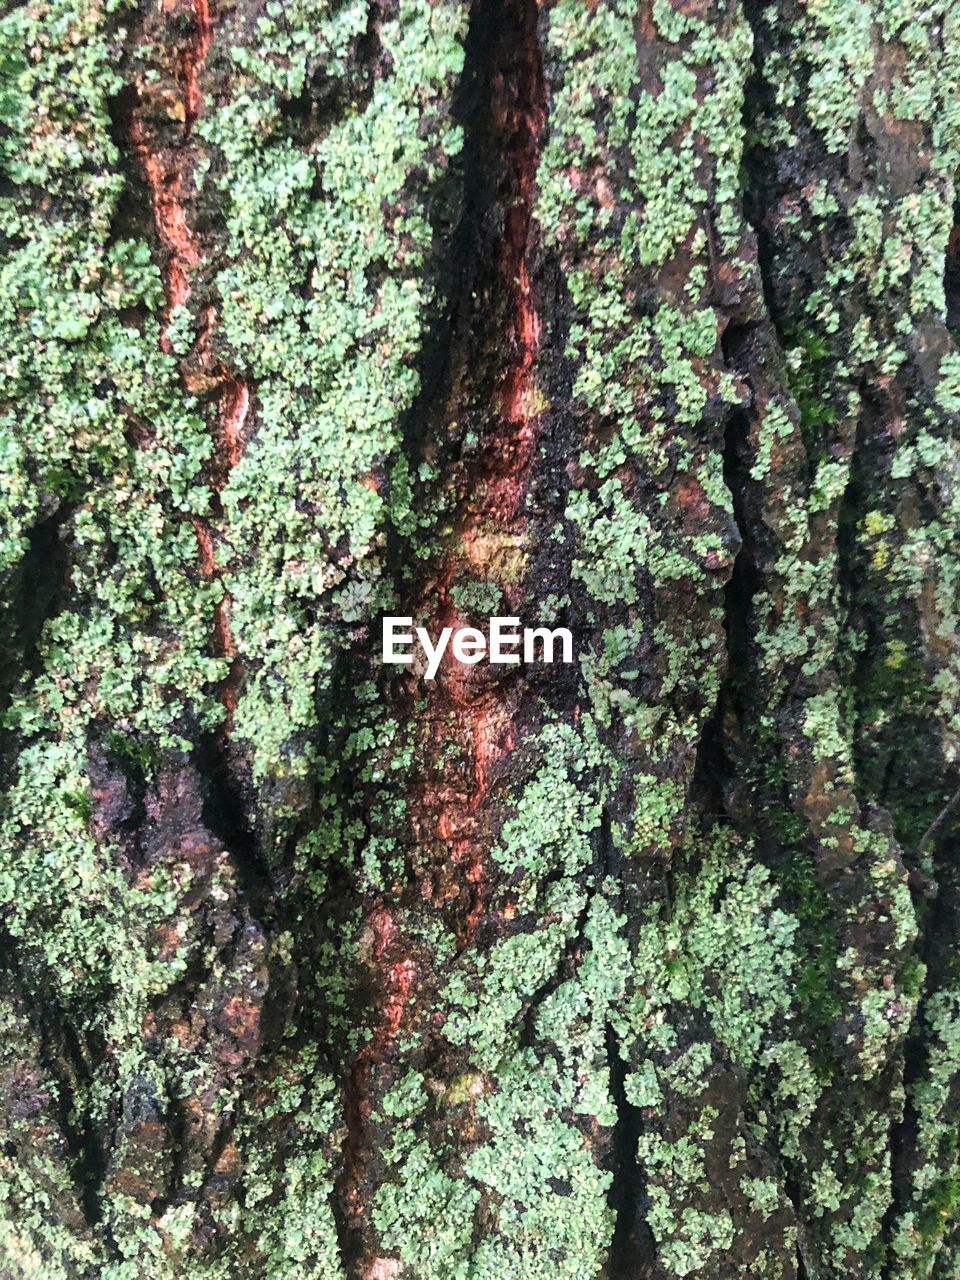 CLOSE-UP OF MOSS GROWING ON TREE TRUNK